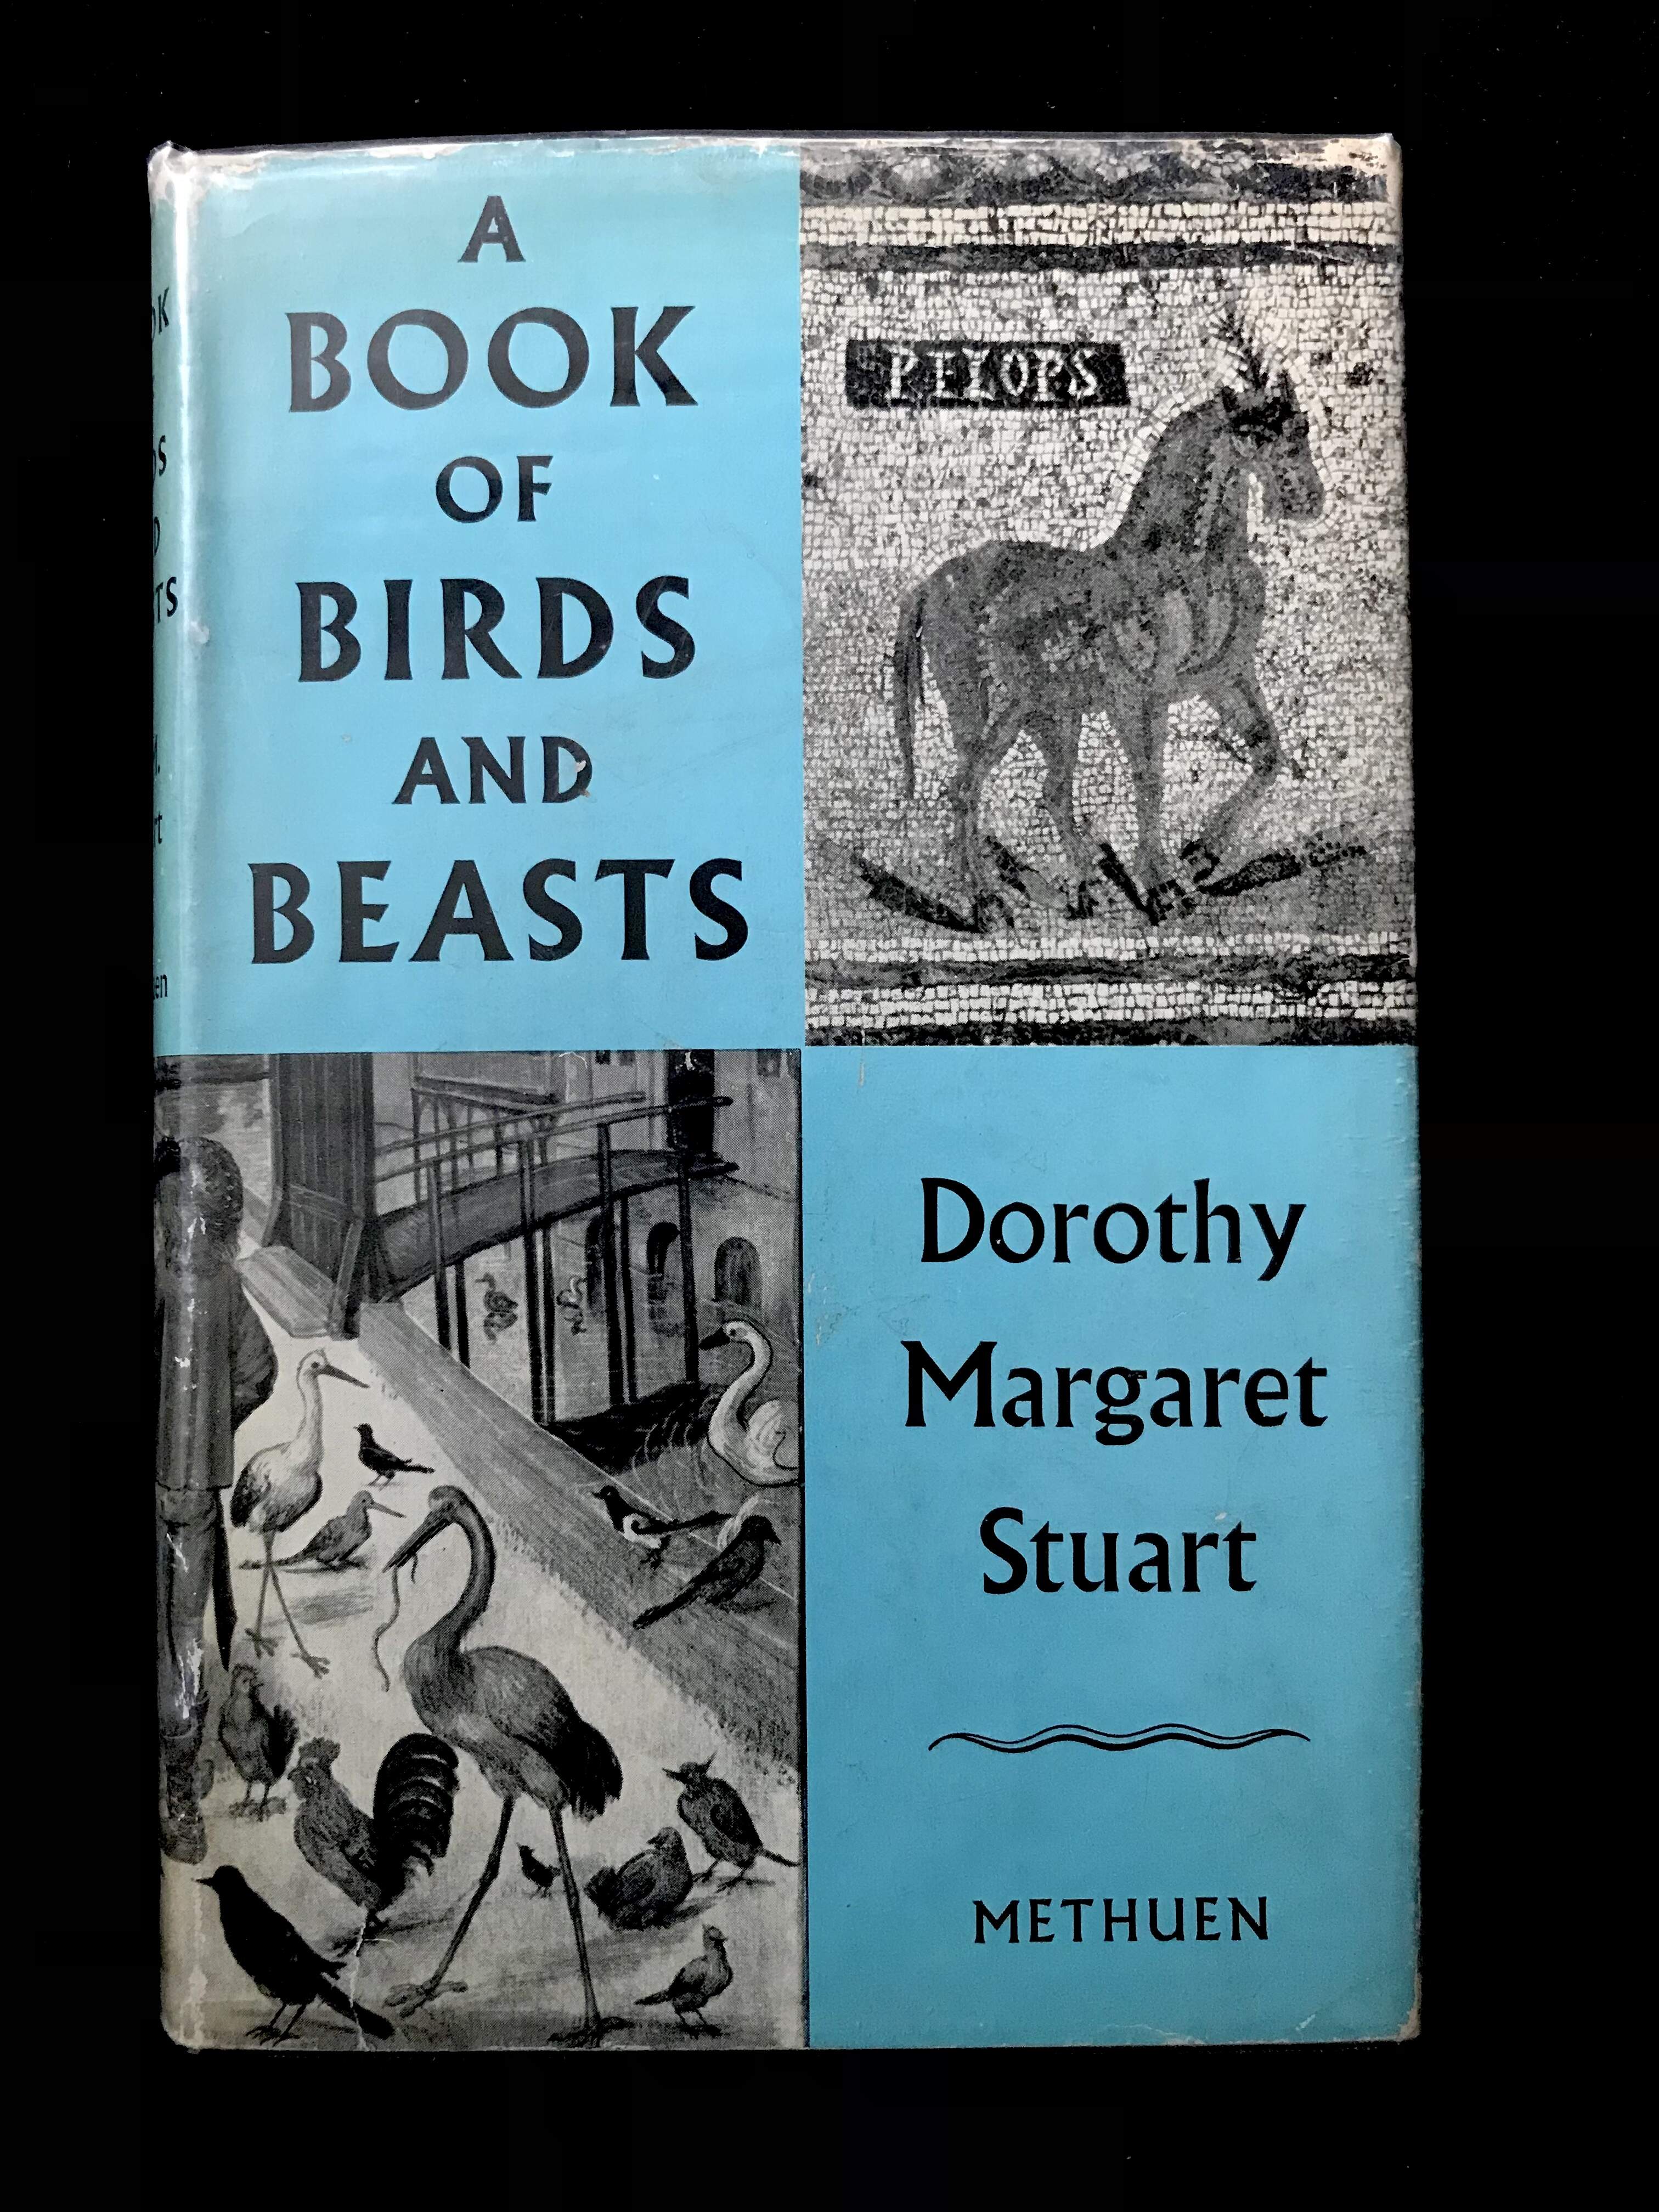 A Book of Birds & Beasts by Dorothy Margaret Stuart